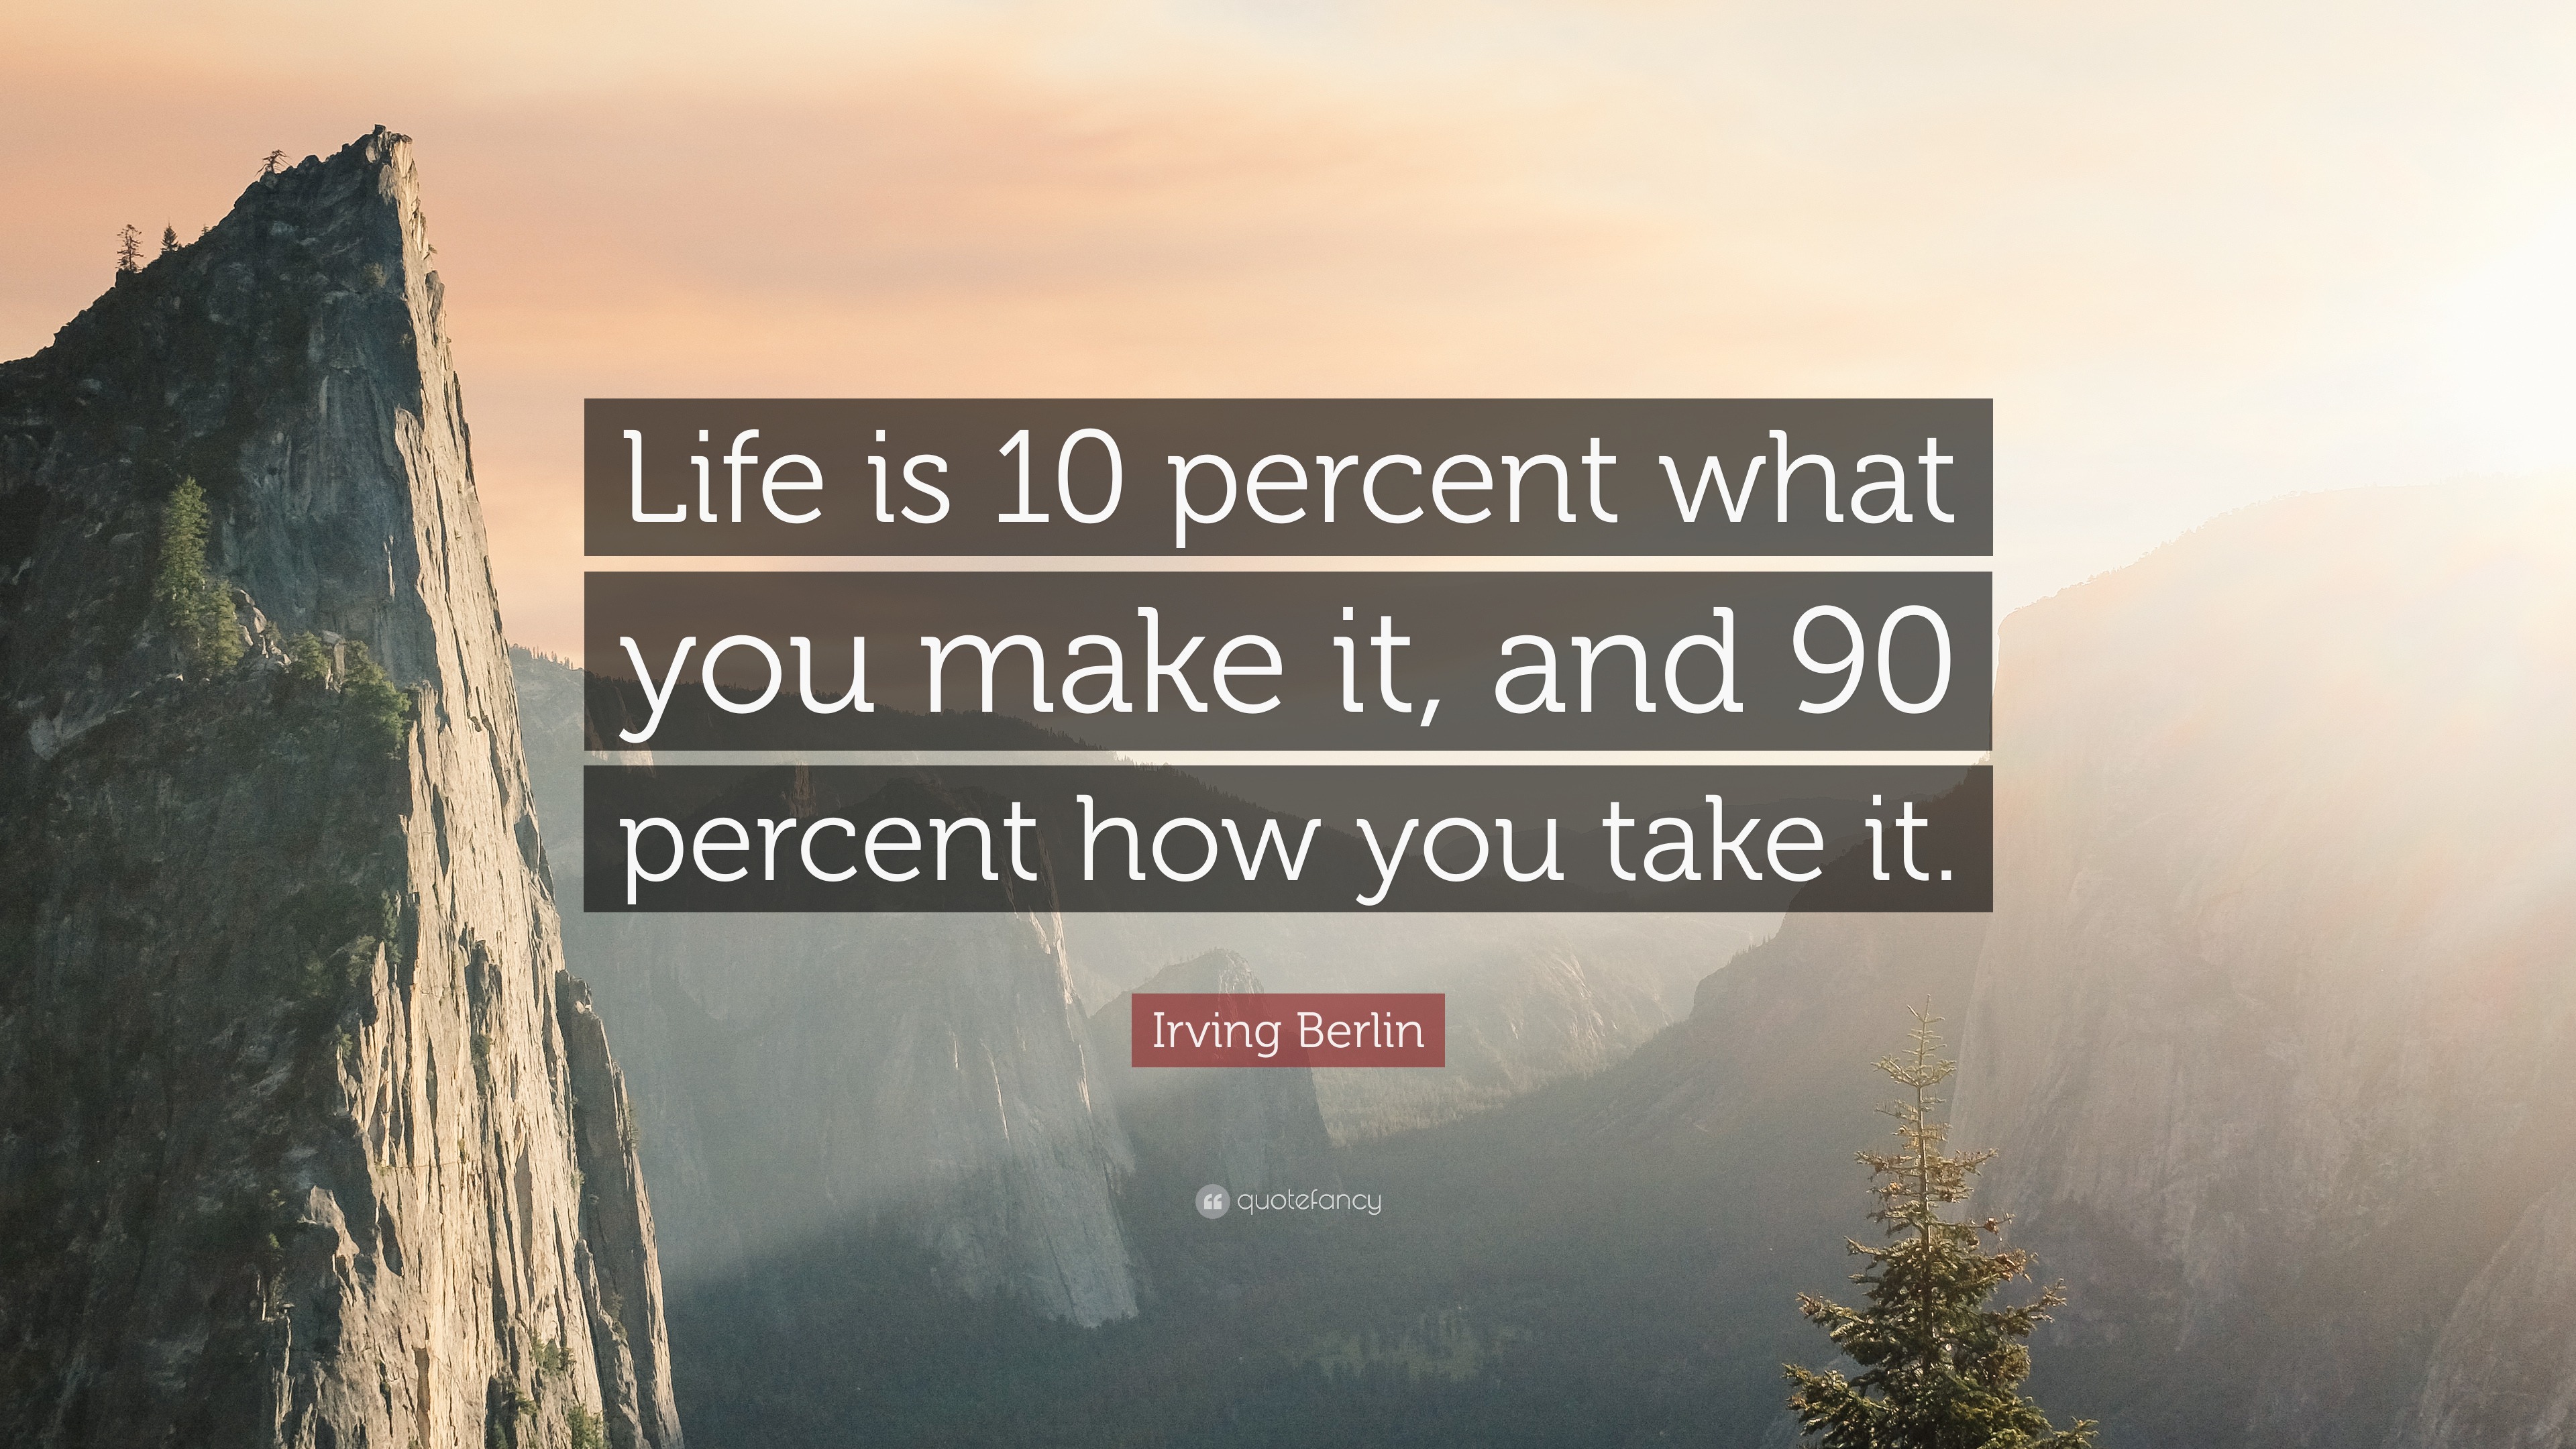 quote life is 10 percent what happens to you